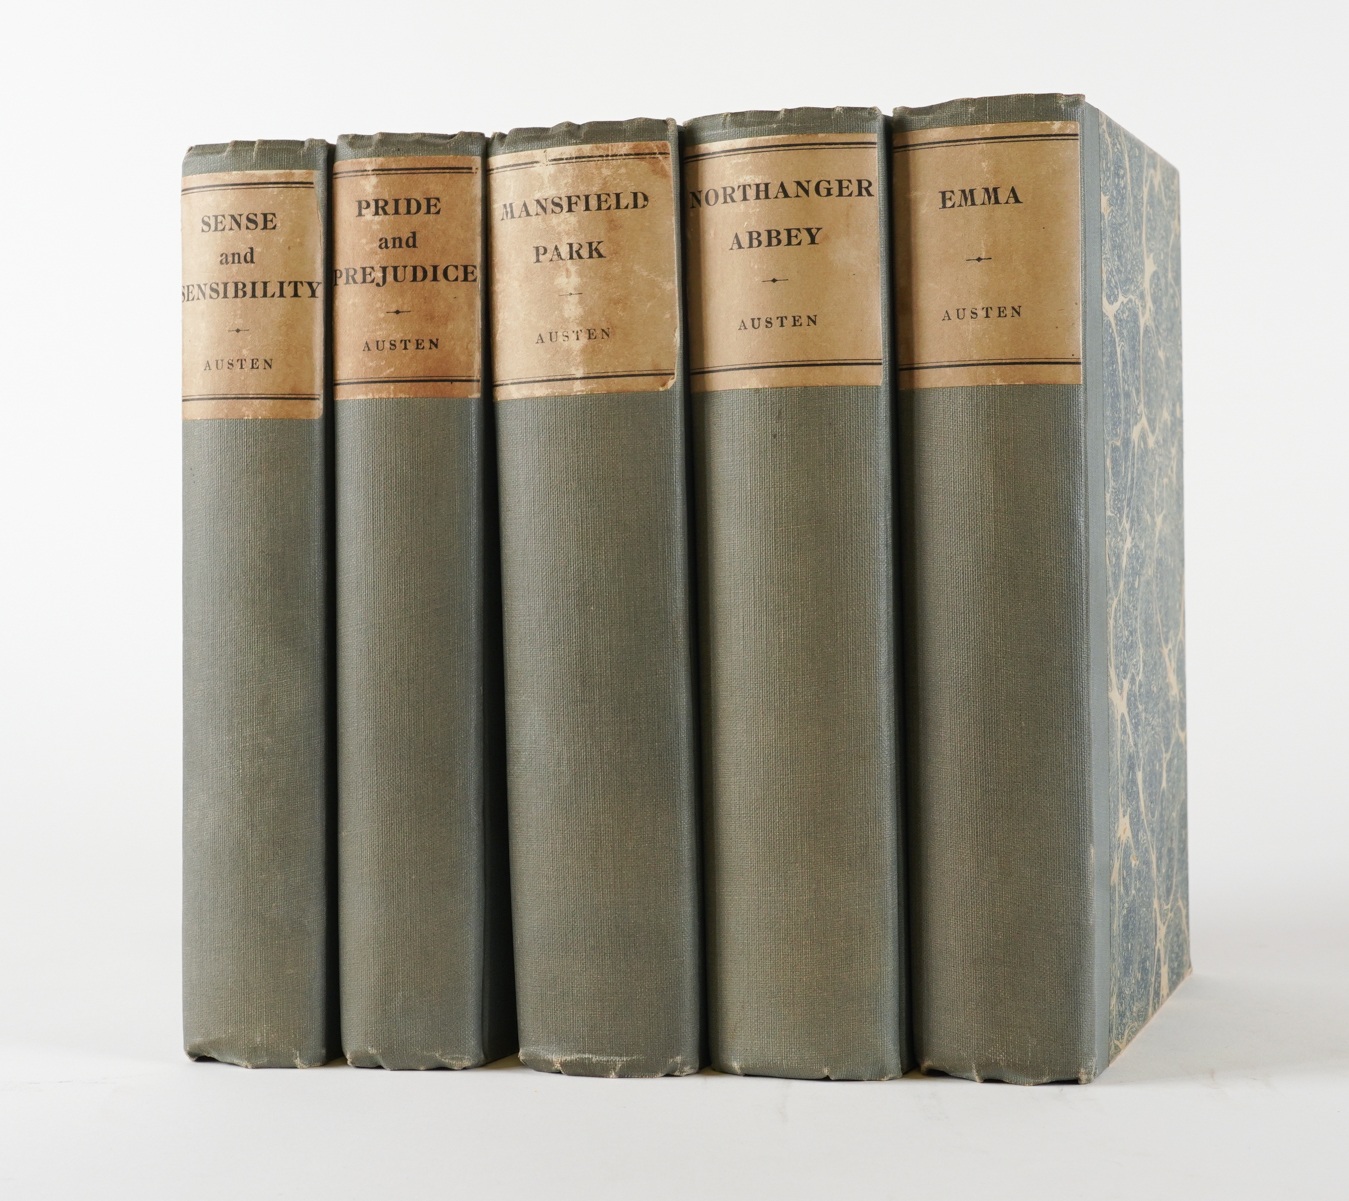 AUSTEN, Jane (1775-1817). The Novels, Oxford, 1923, 5 volumes, large 8vo, coloured frontispieces, original buckram-backed boards. ONE OF 1,000 SETS. (5)